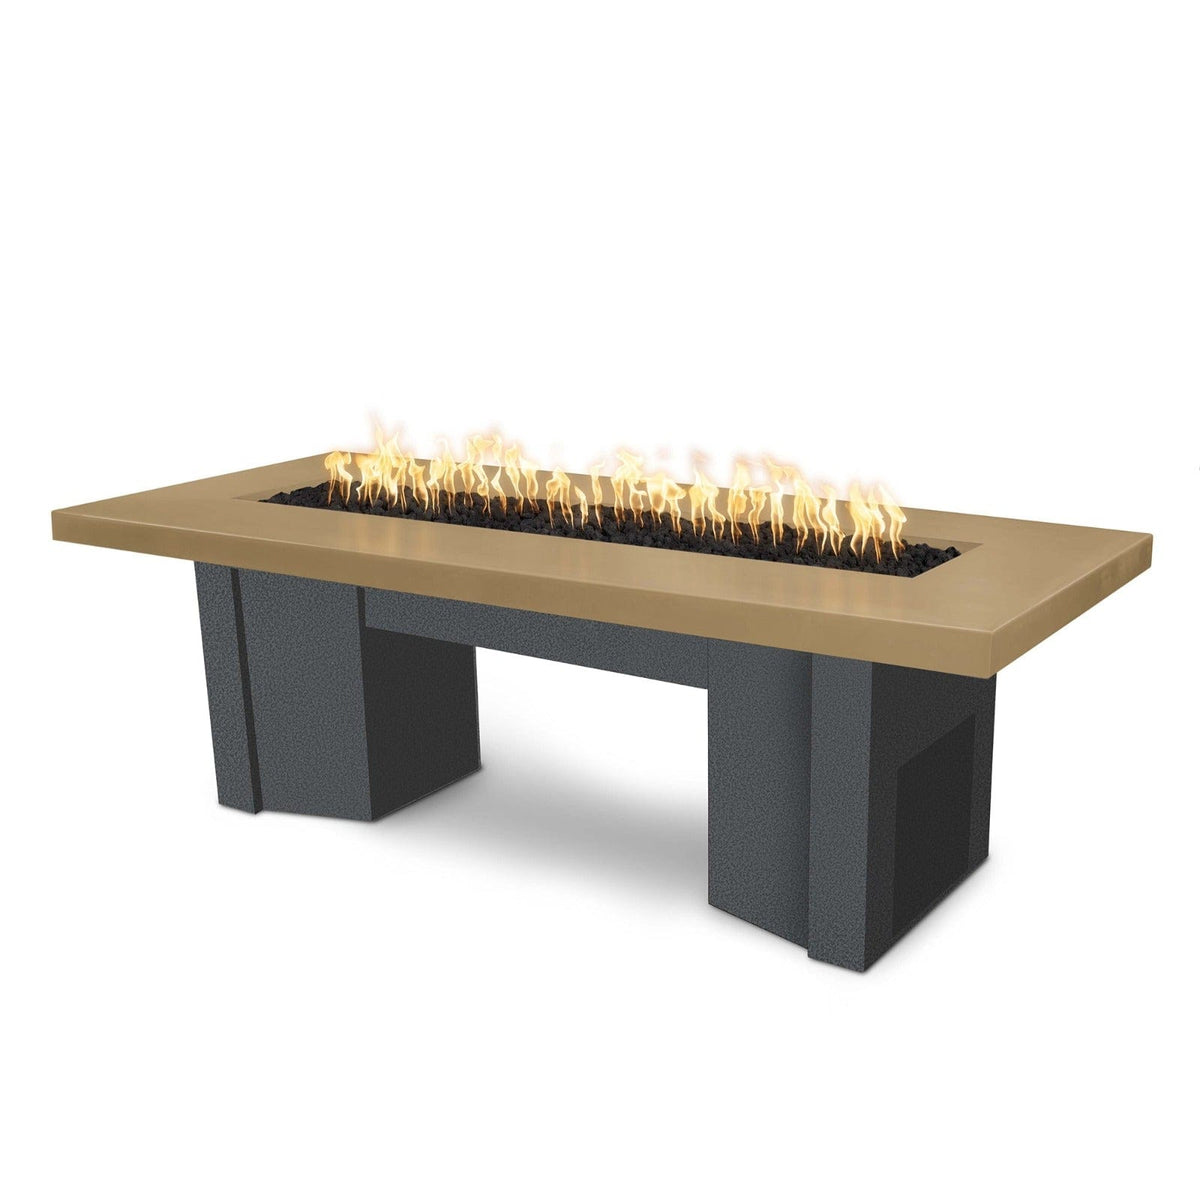 The Outdoor Plus Fire Features Brown (-BRN) / Silver Vein Powder Coated Steel (-SLV) The Outdoor Plus 60&quot; Alameda Fire Table Smooth Concrete in Natural Gas - Flame Sense System with Push Button Spark Igniter / OPT-ALMGFRC60FSEN-NG